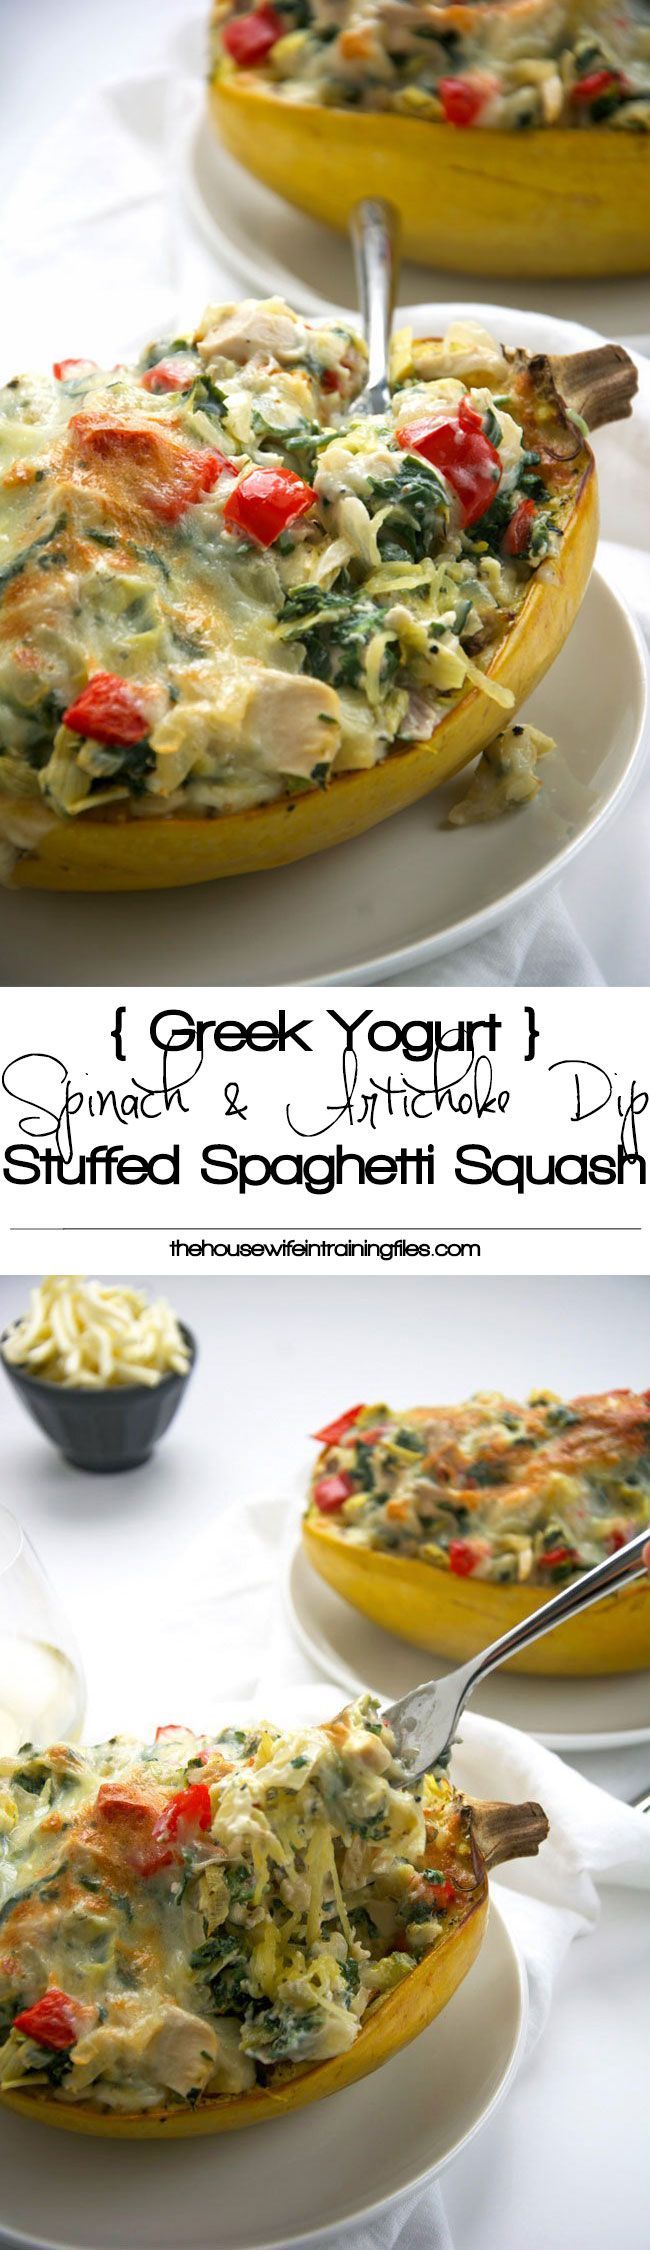 Stuffed spaghetti squash filled with a lightened up version of a favorite dip – spinach and artichoke! So healthy.